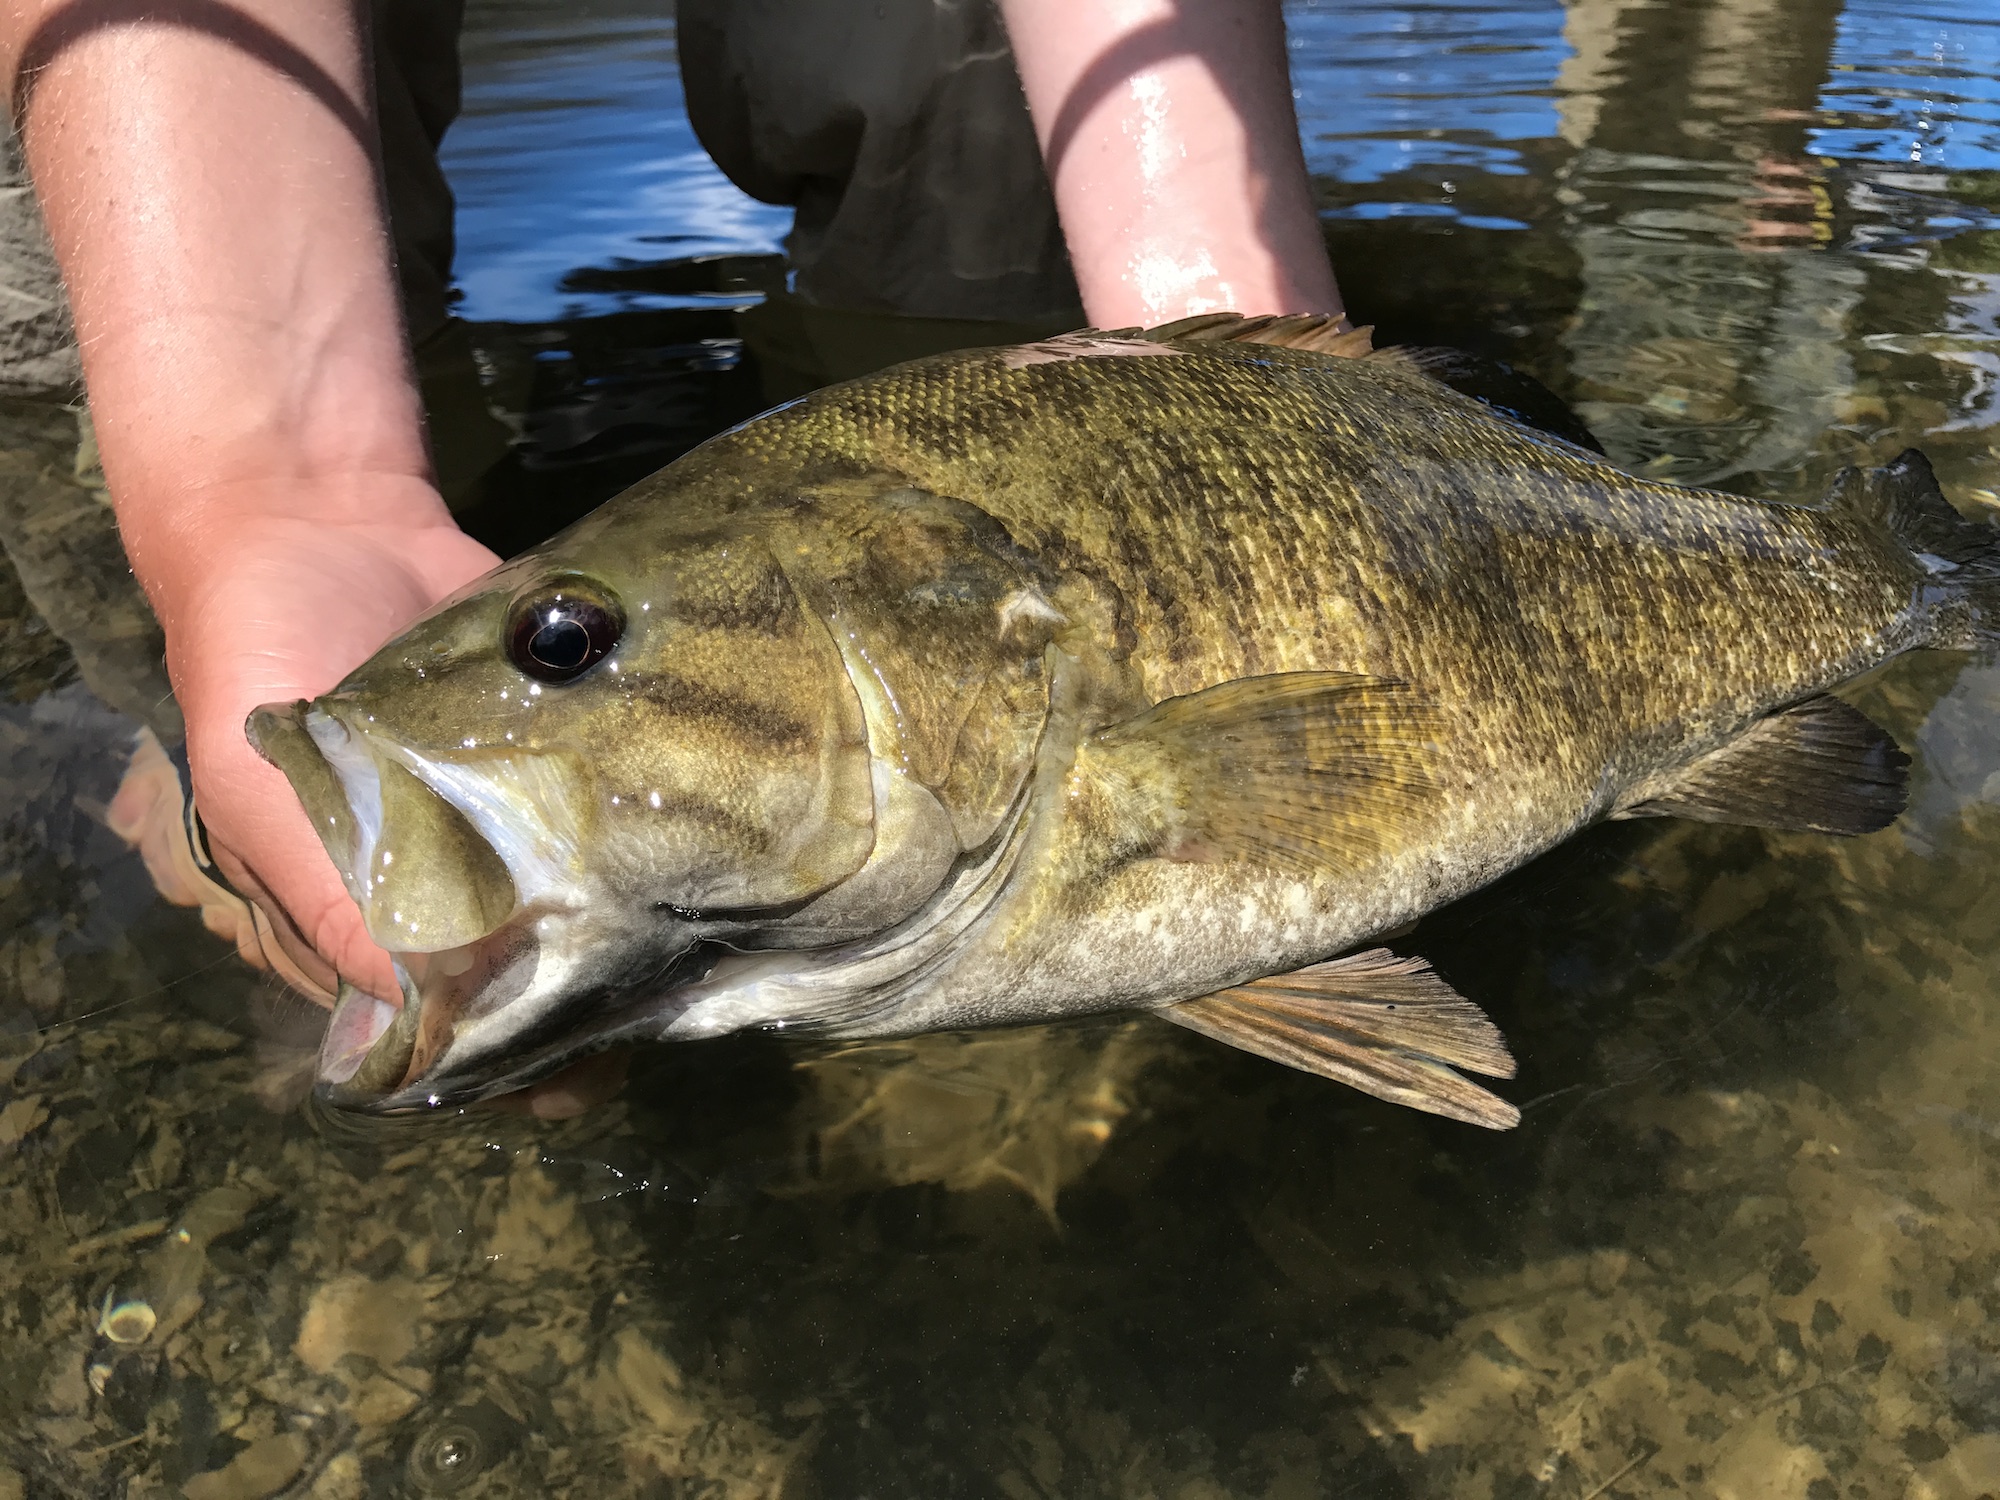 How fast does a bass grow?